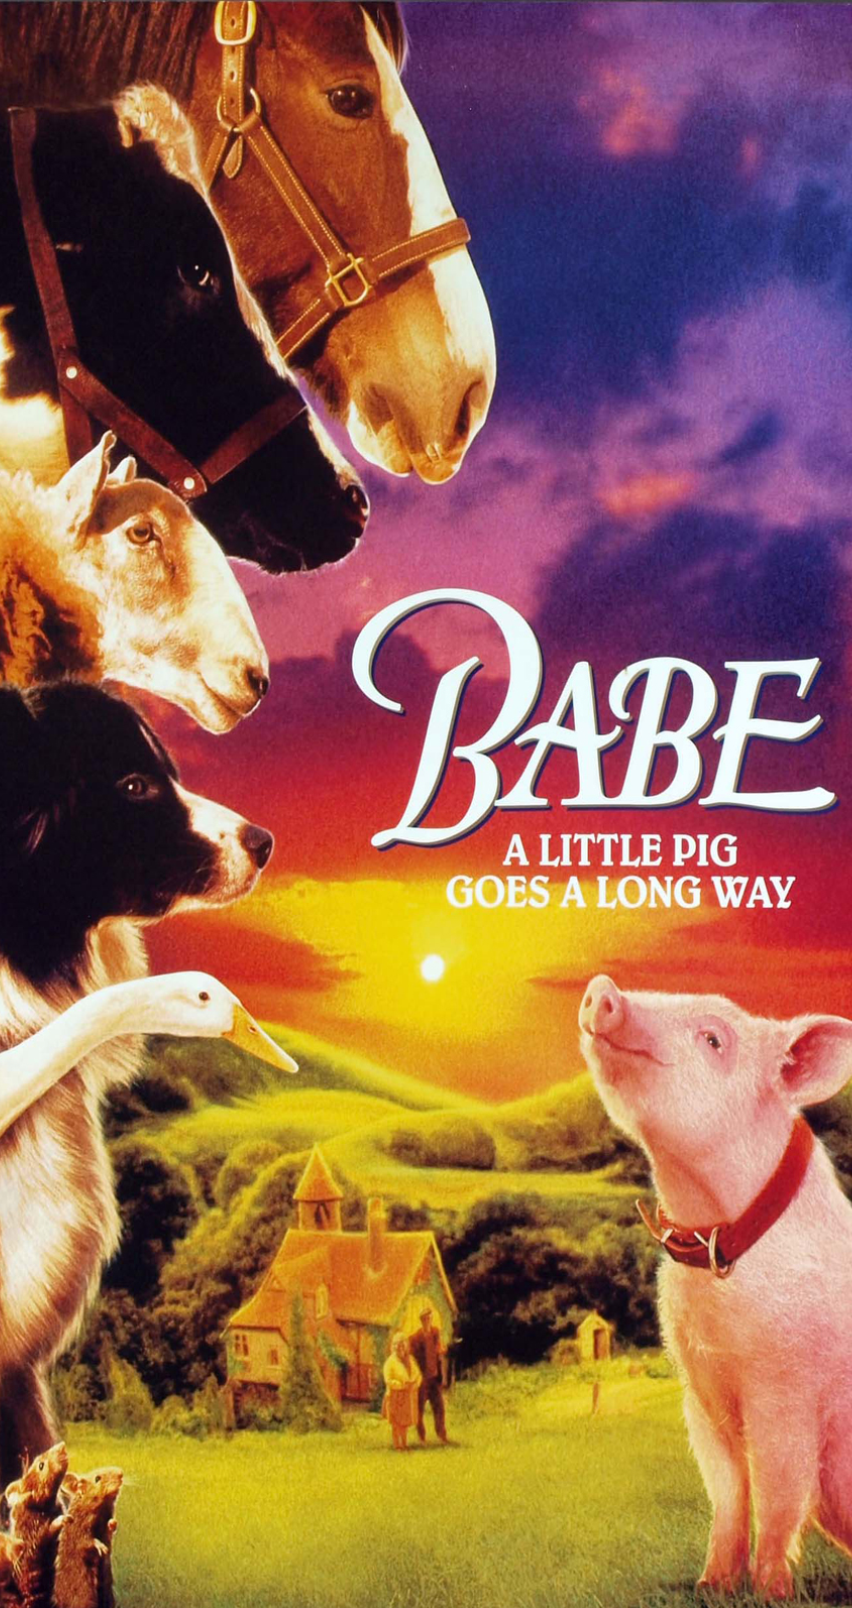 Babe 1995 Movie Poster - HD Wallpaper 